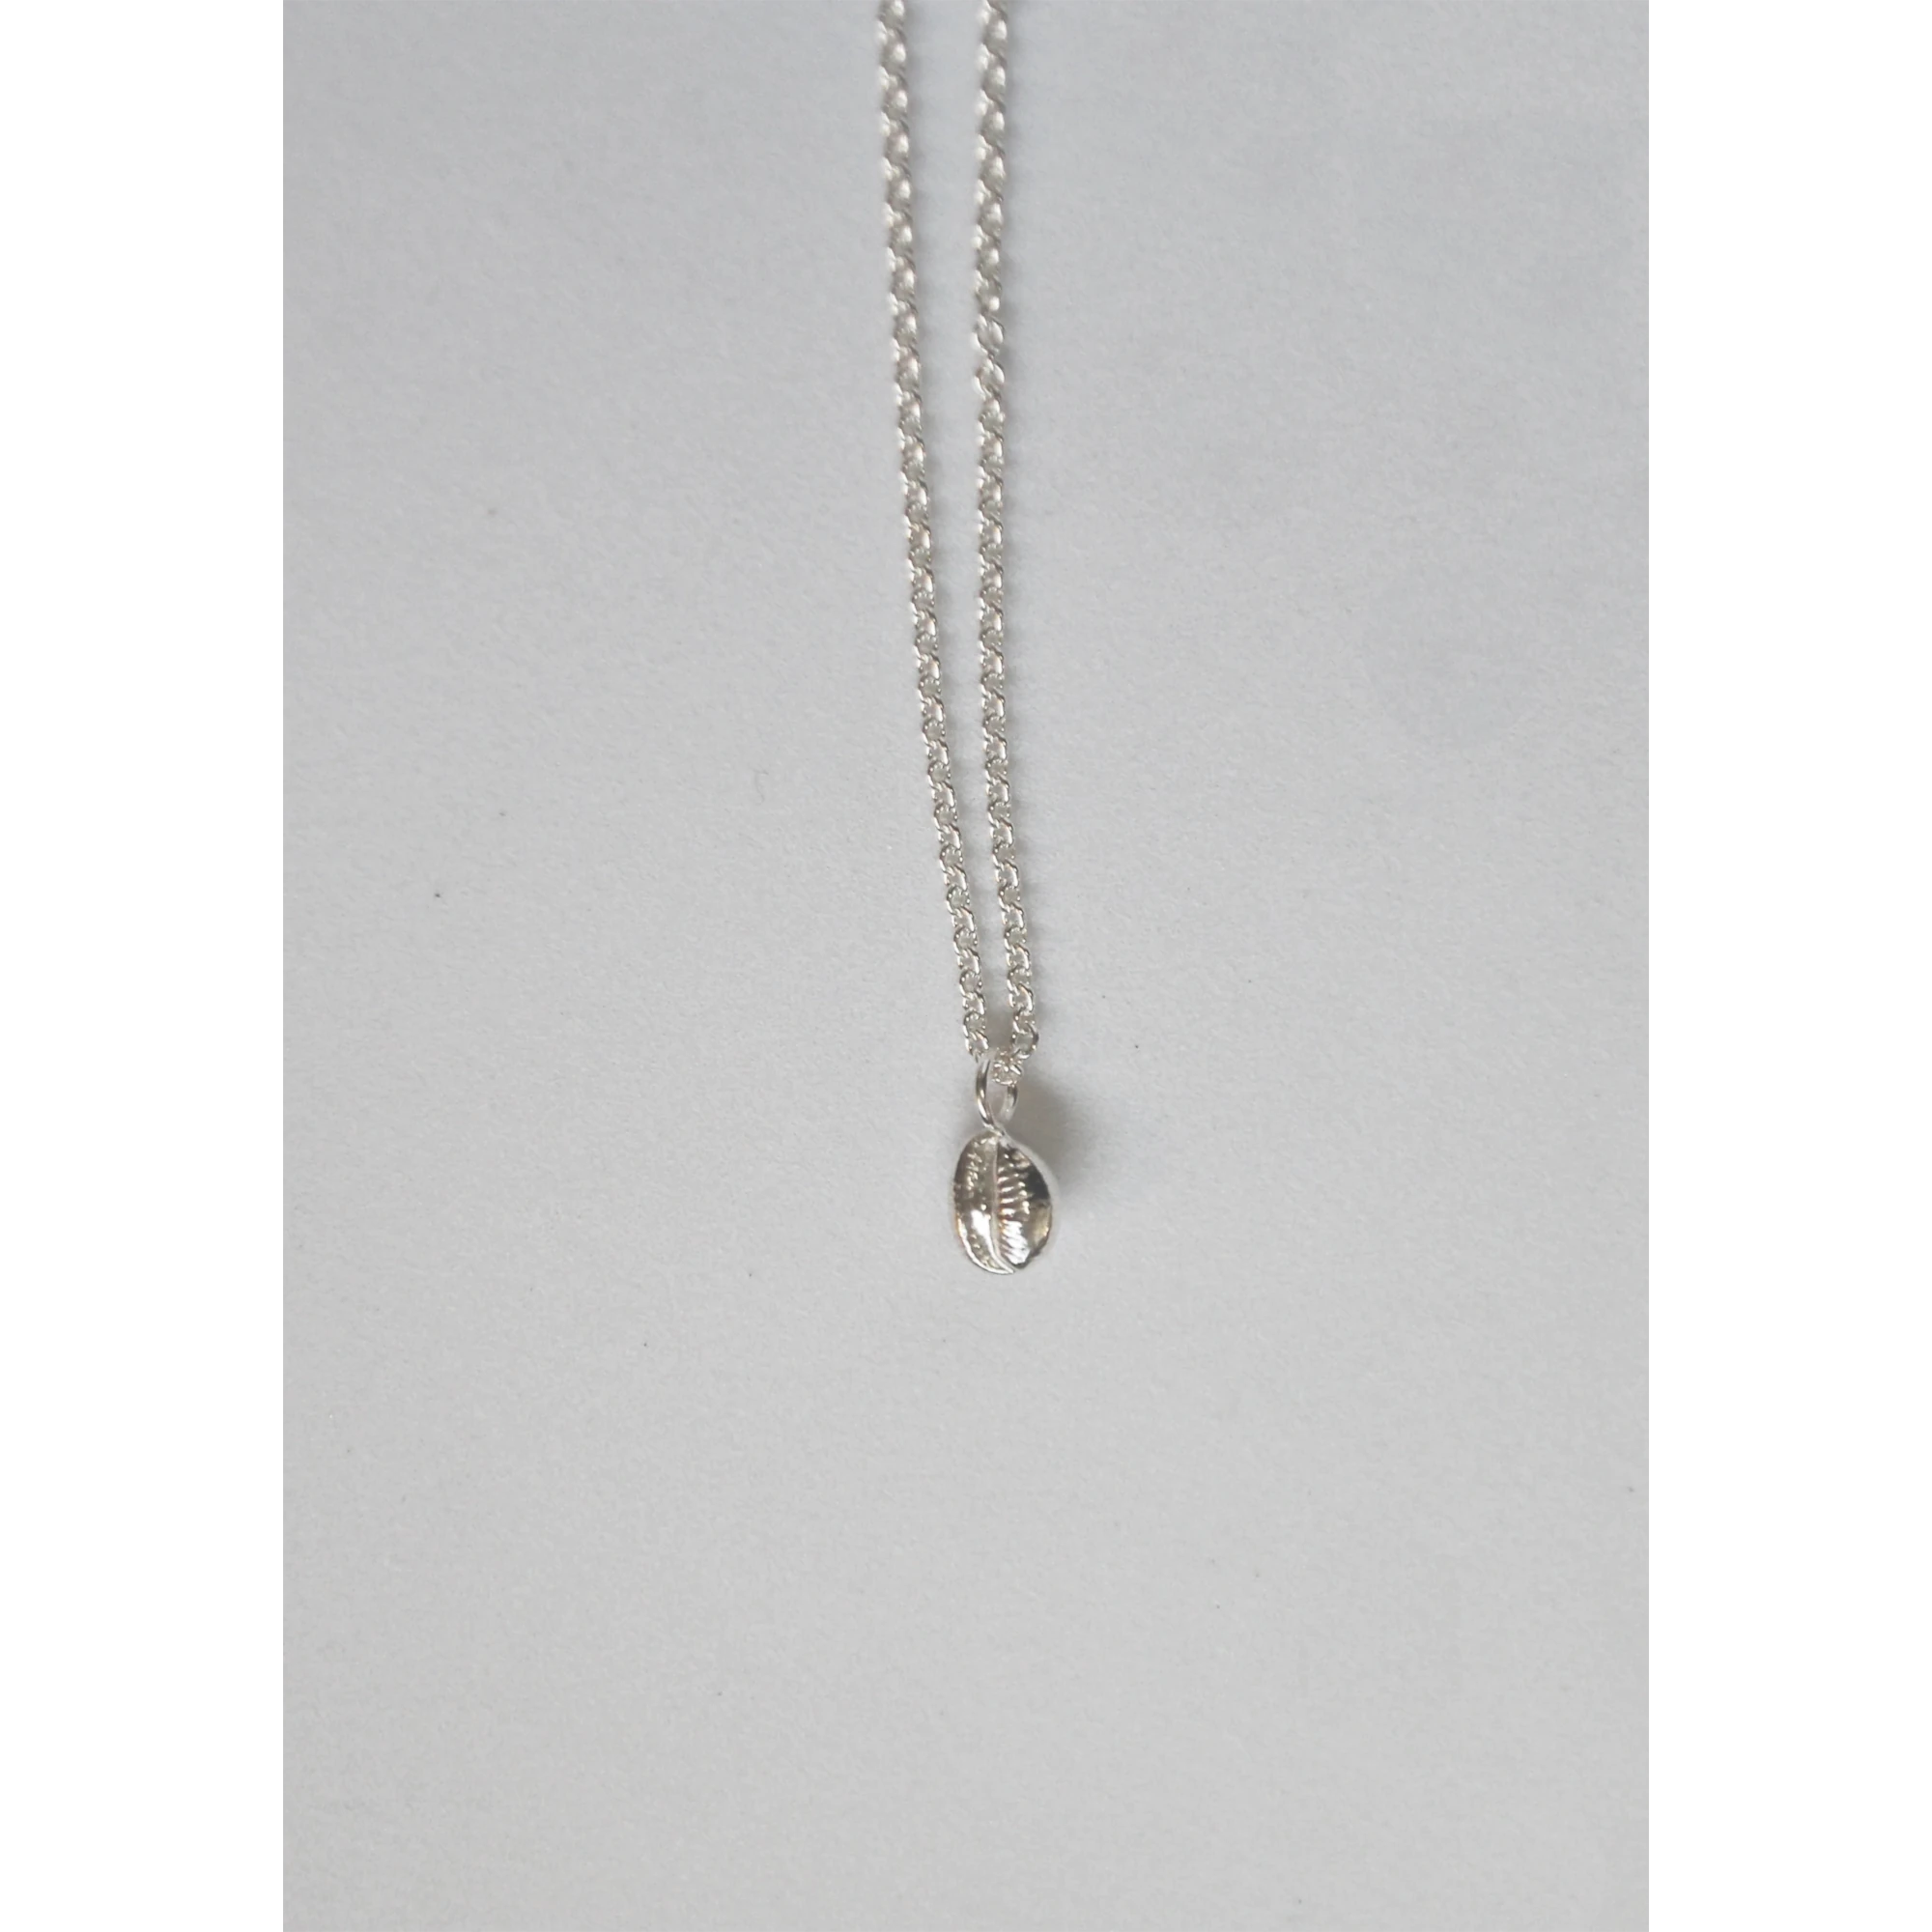 Tiny Cowri Shell Necklace in Silver by Hannah Bourn